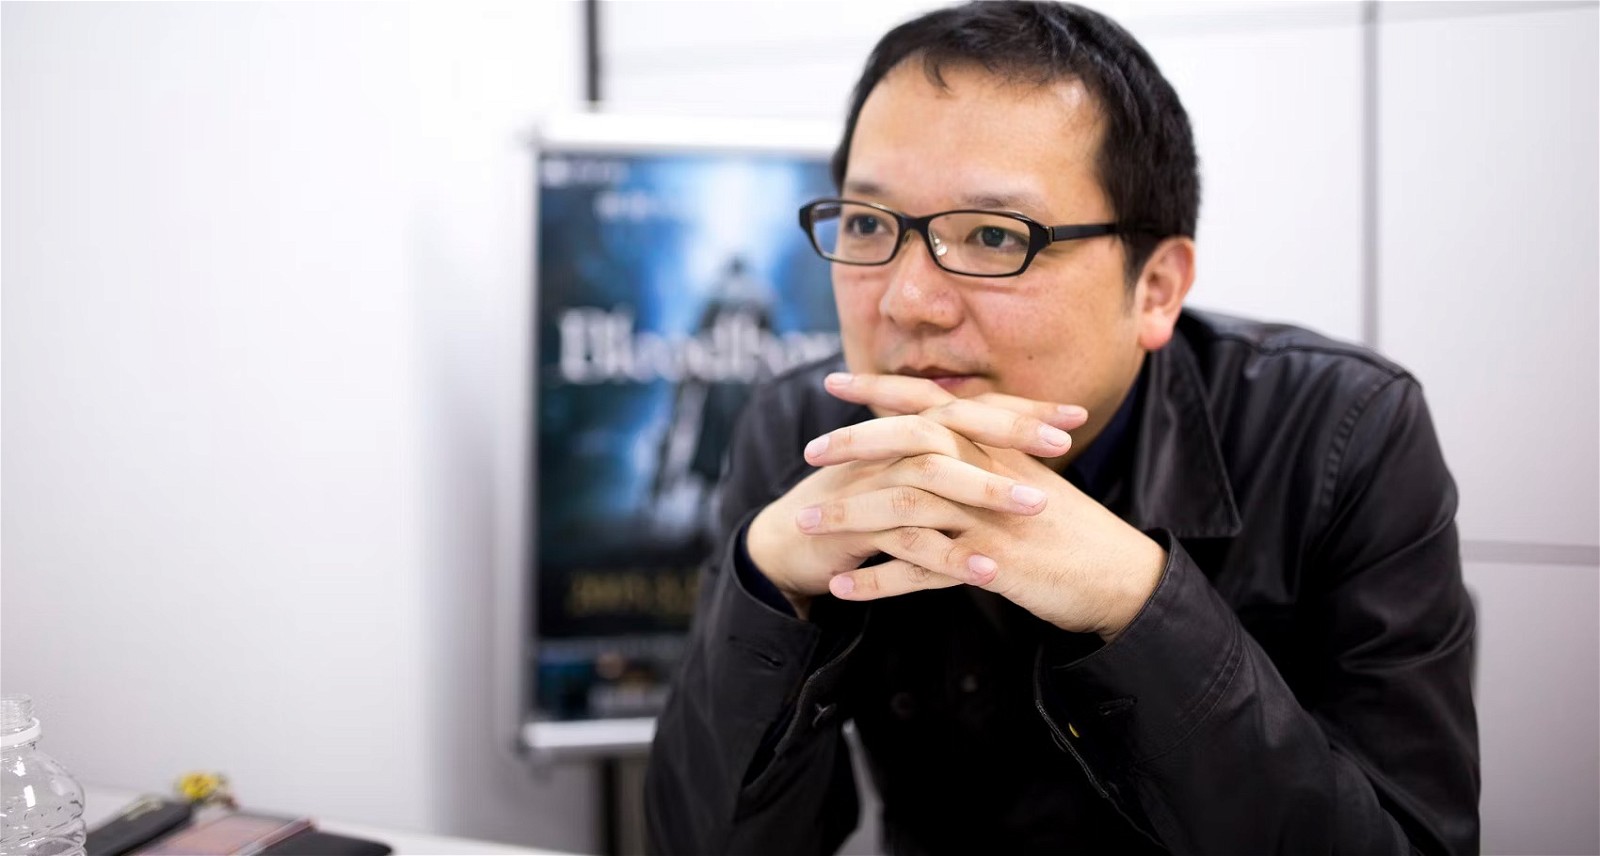 Hidetaka Miyazaki felt that Martin writing Elden Ring's whole story would "limit his creative output". Image credit: The NY Times